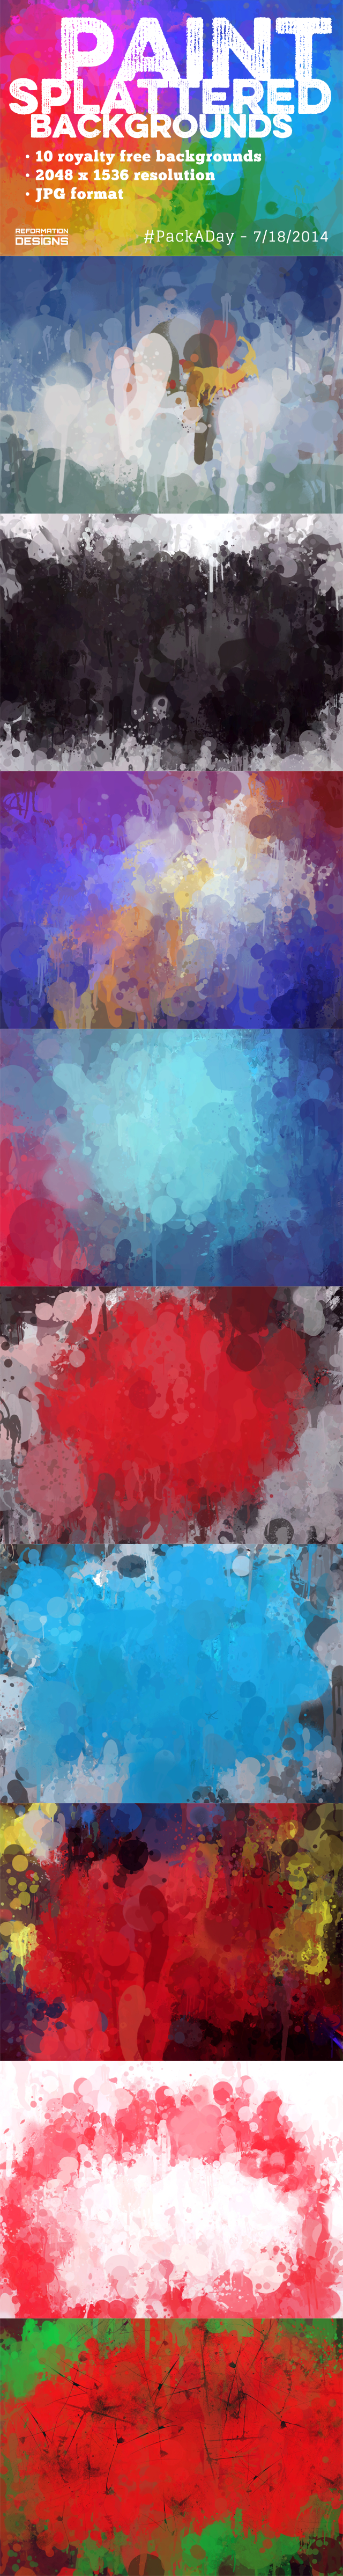 reformation designs paint paint splatters abstract backgrounds design resources Abstract Art